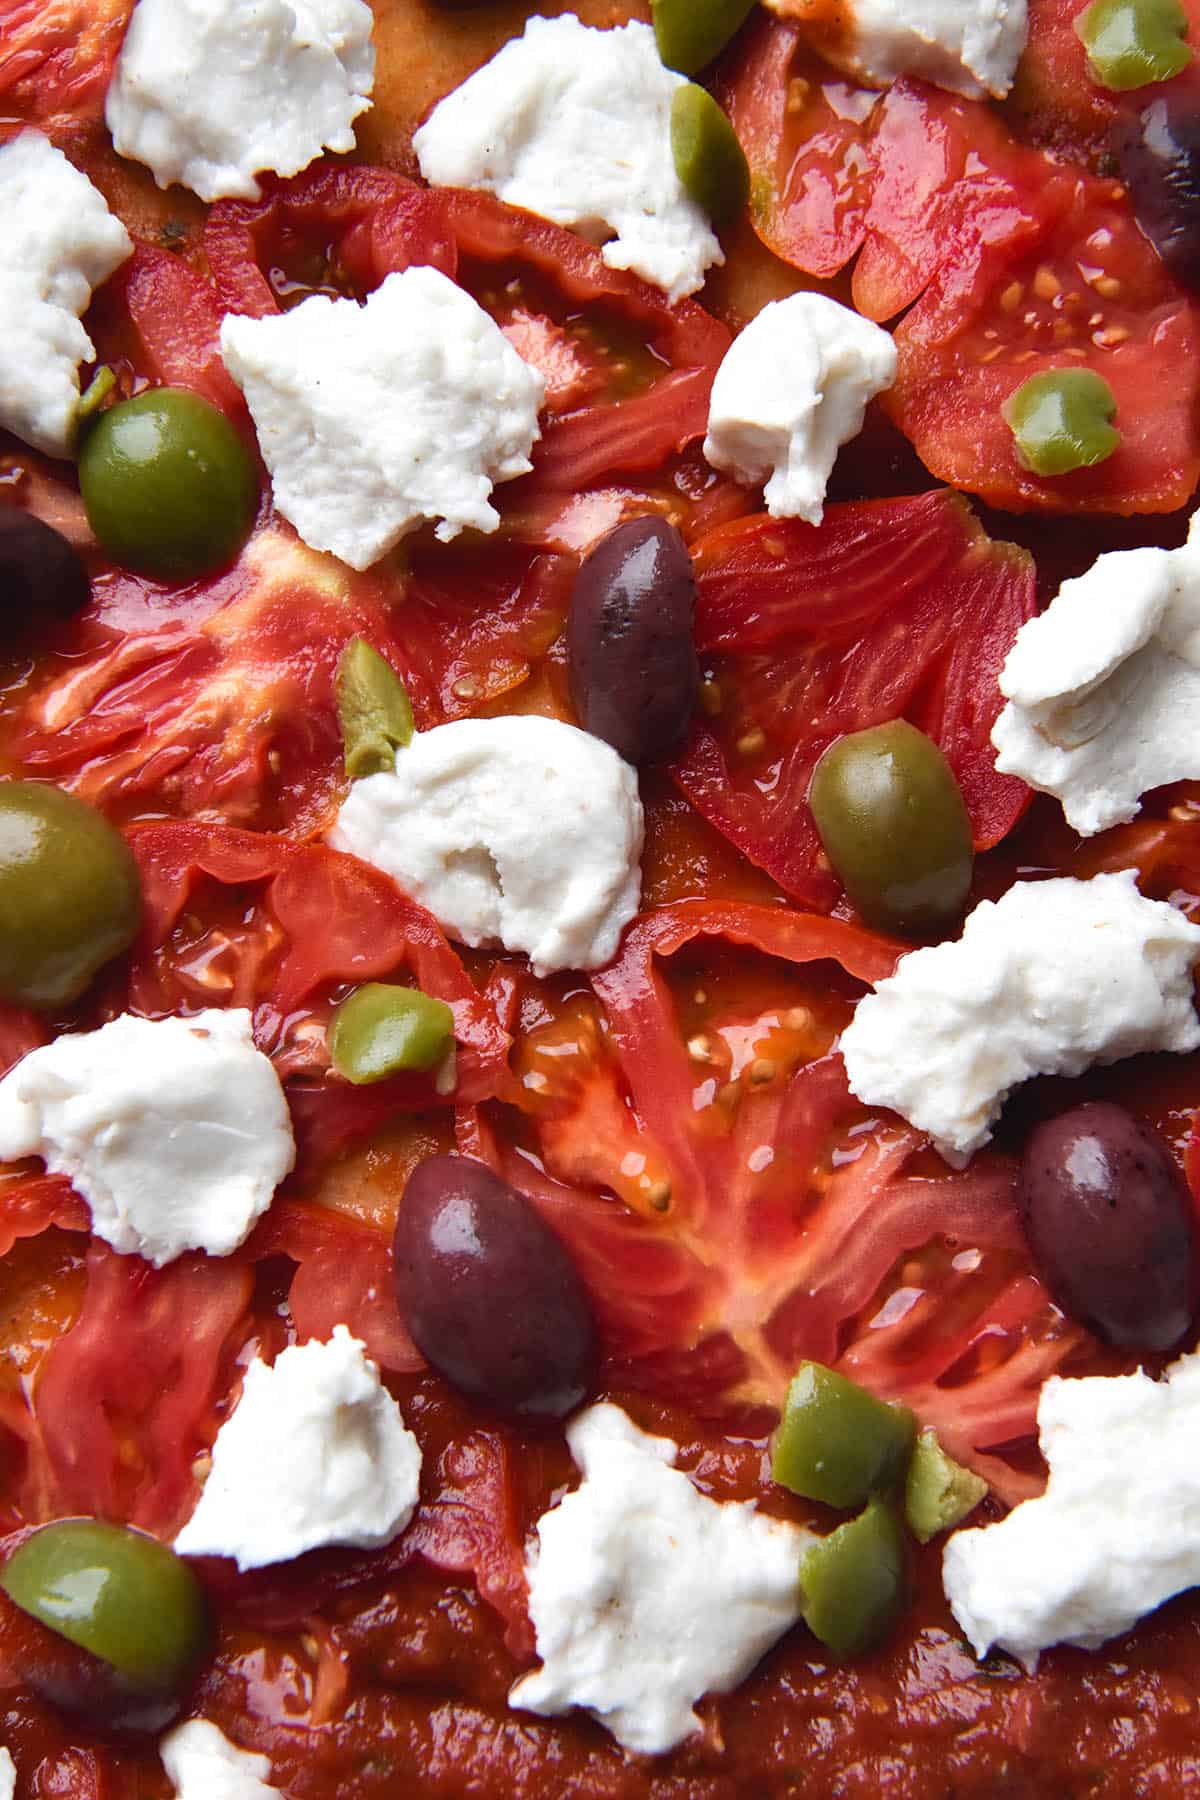 An aerial close up view of a pizza topped with pizza sauce, sliced heirloom tomatoes, different varieties of olives and vegan mozzarella.